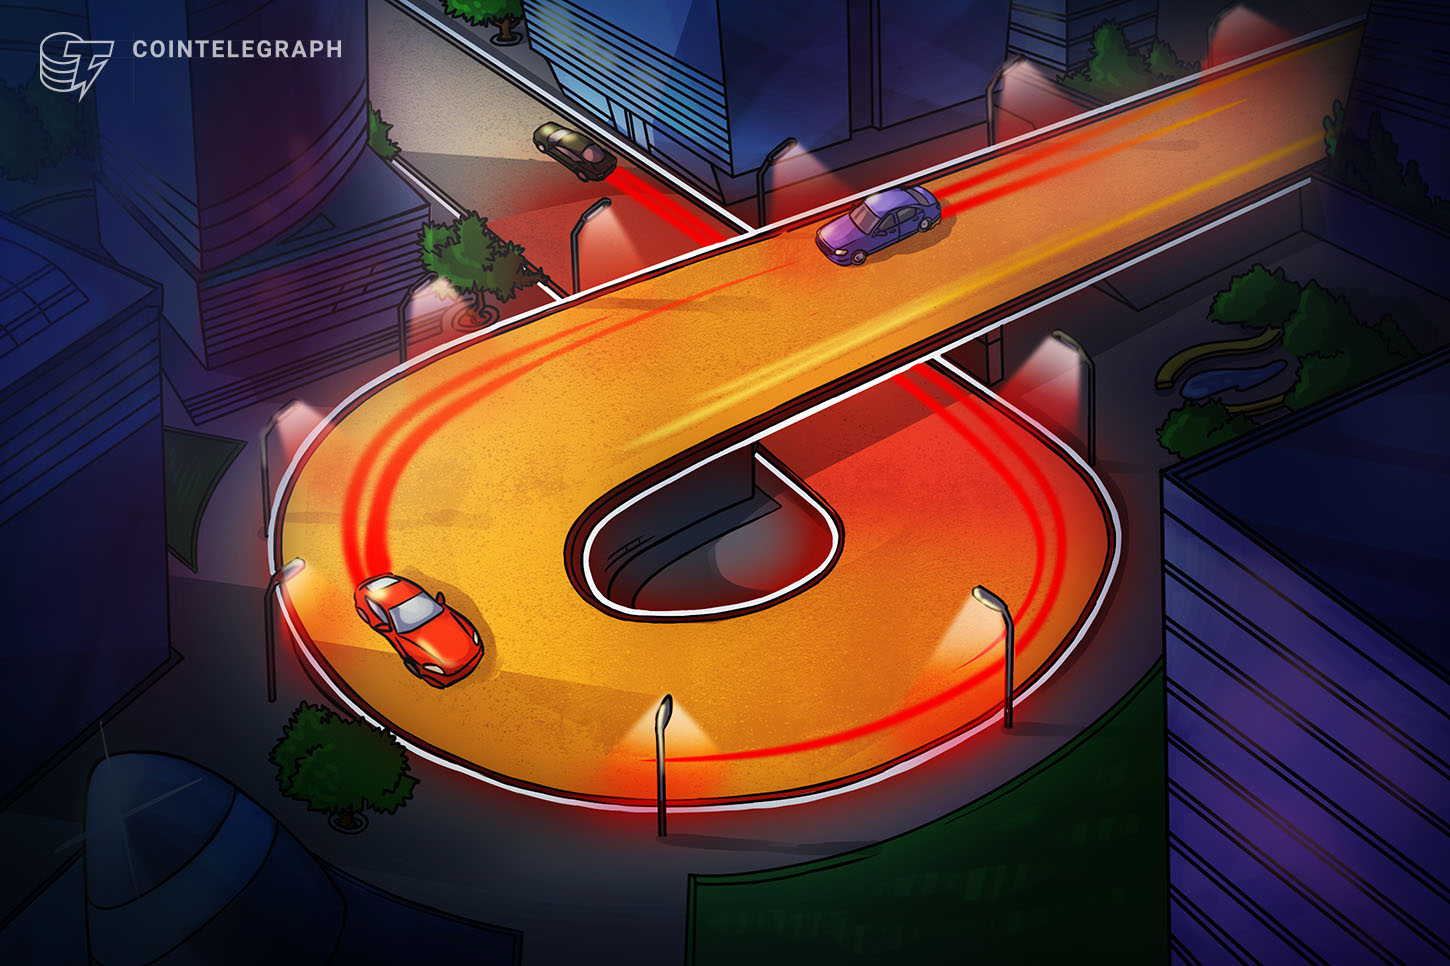 Bithumb Alternate to Reportedly File for IPO in South Korea